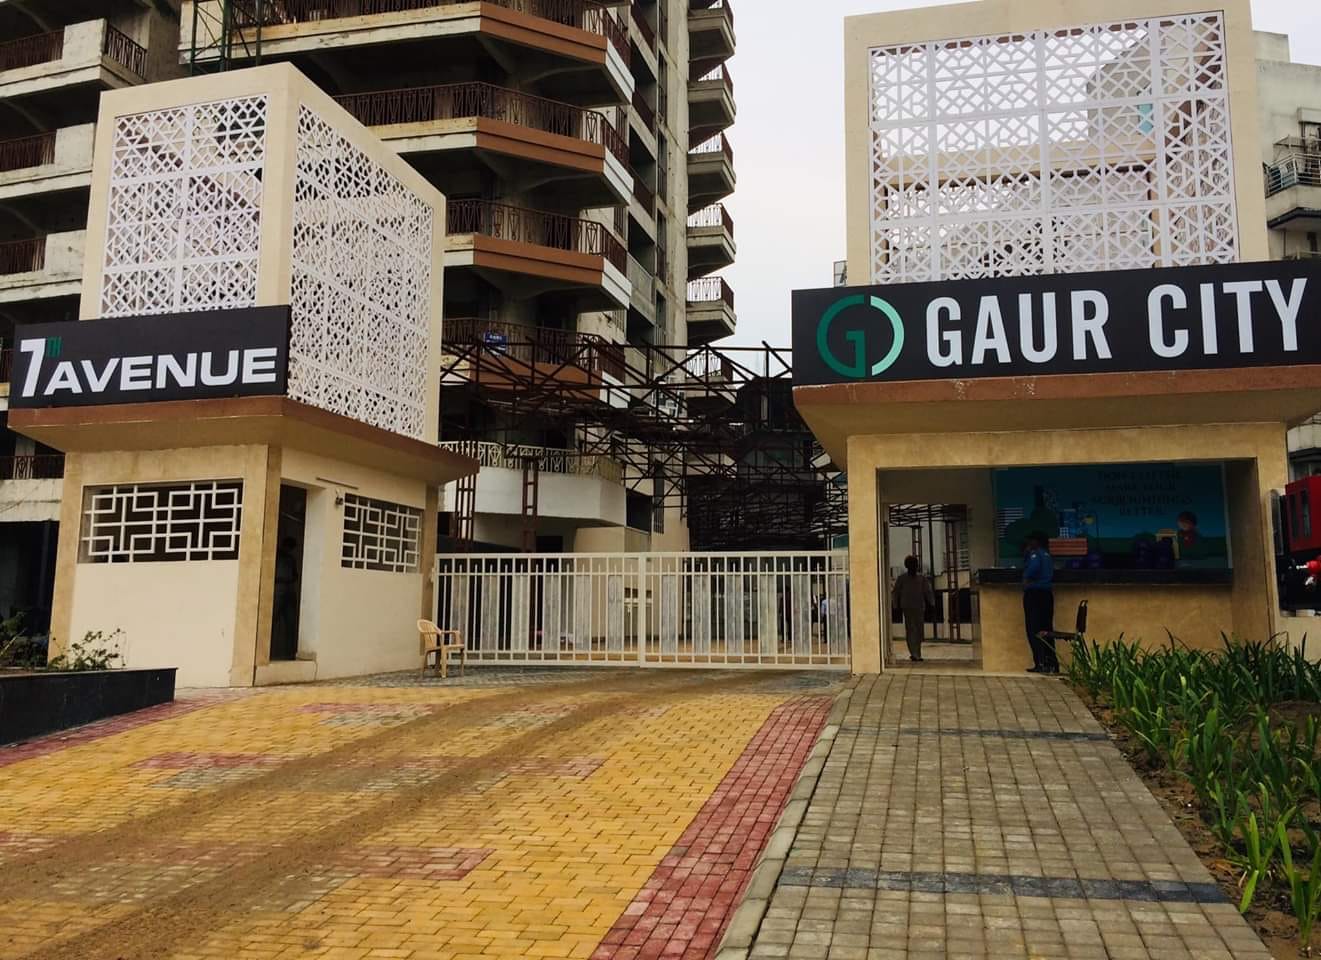 Discover the Spacious and Well-Designed Flats of Gaur City 7th Avenue: A Guide to the Floor Plan